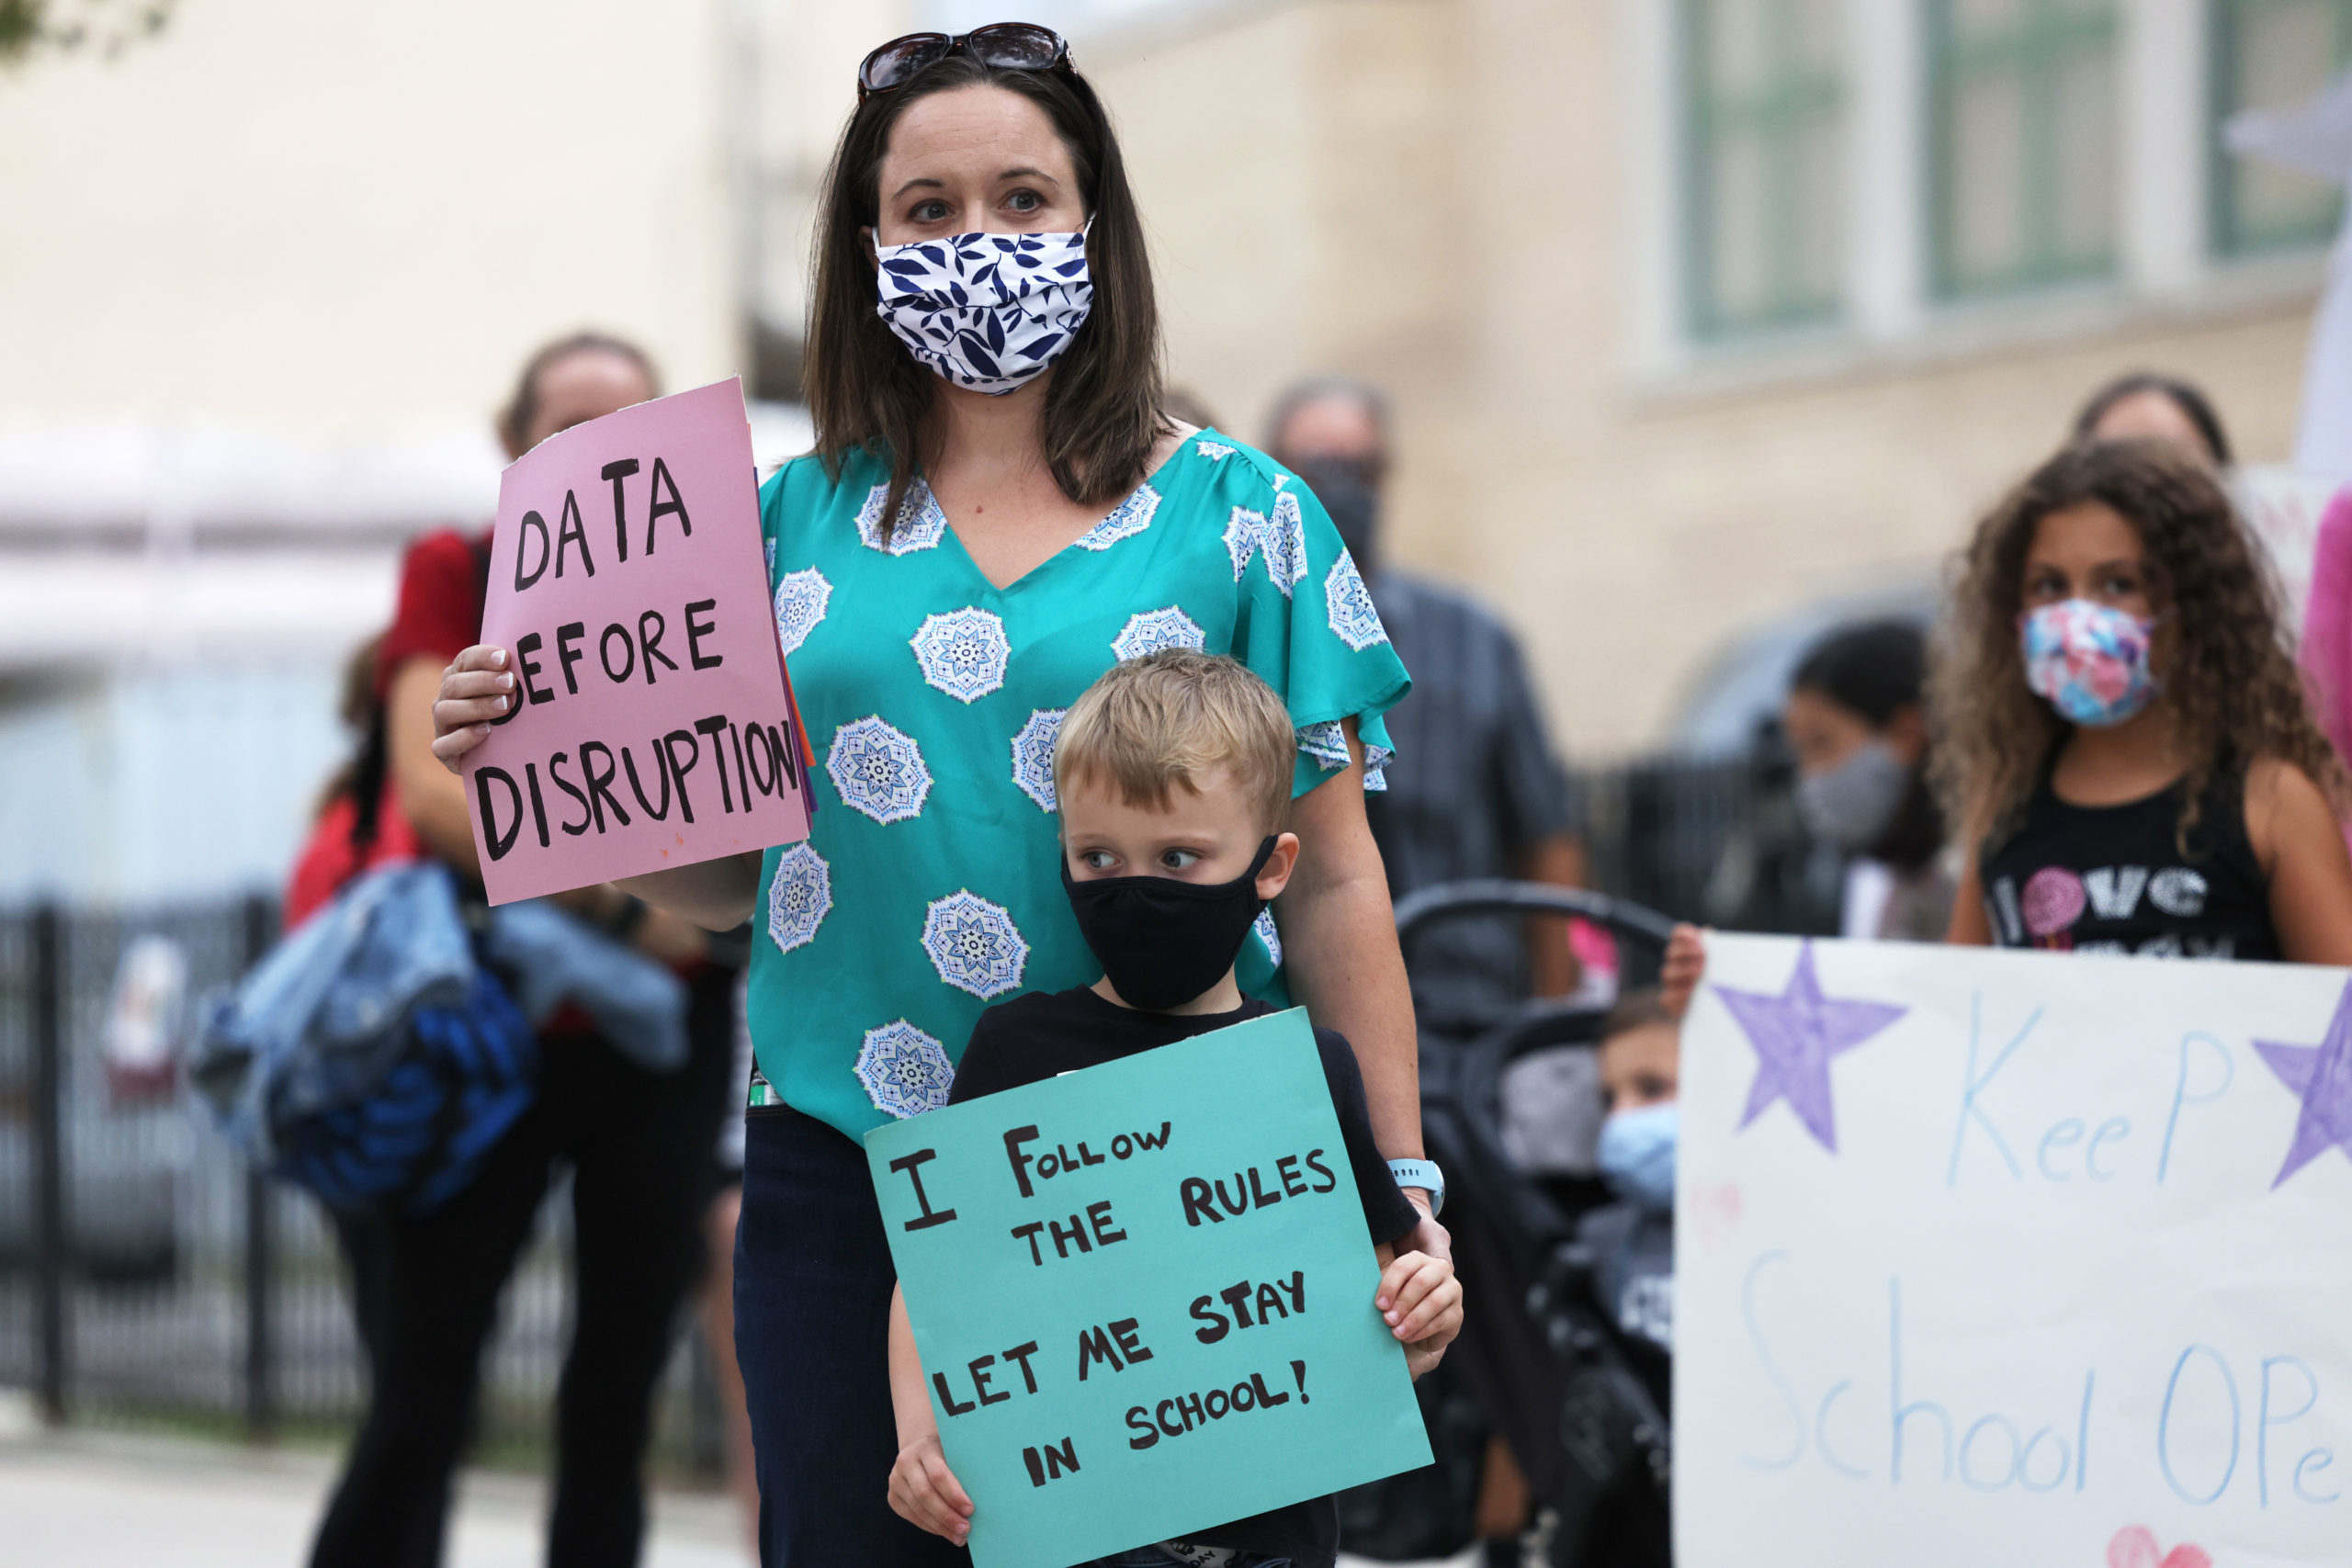 Parents and kids hold signs during a protest in favor of reopening schools in New York City. (Michael M. Santiago/Getty Images)